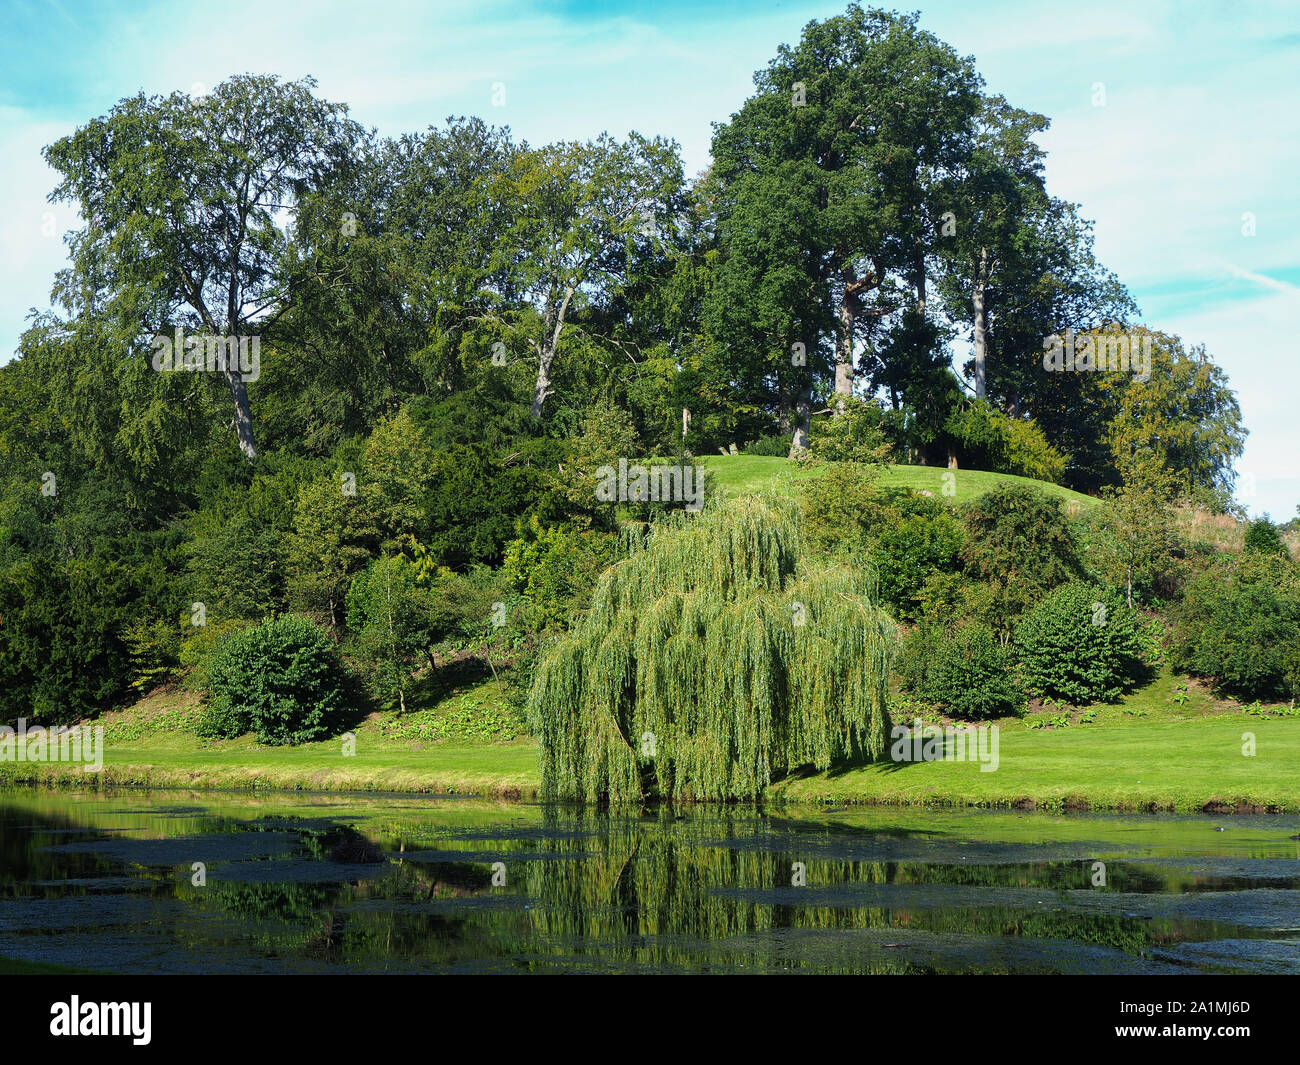 Weeping willow and other trees on a hill beside a lake in a country park in North Yorkshire, England Stock Photo